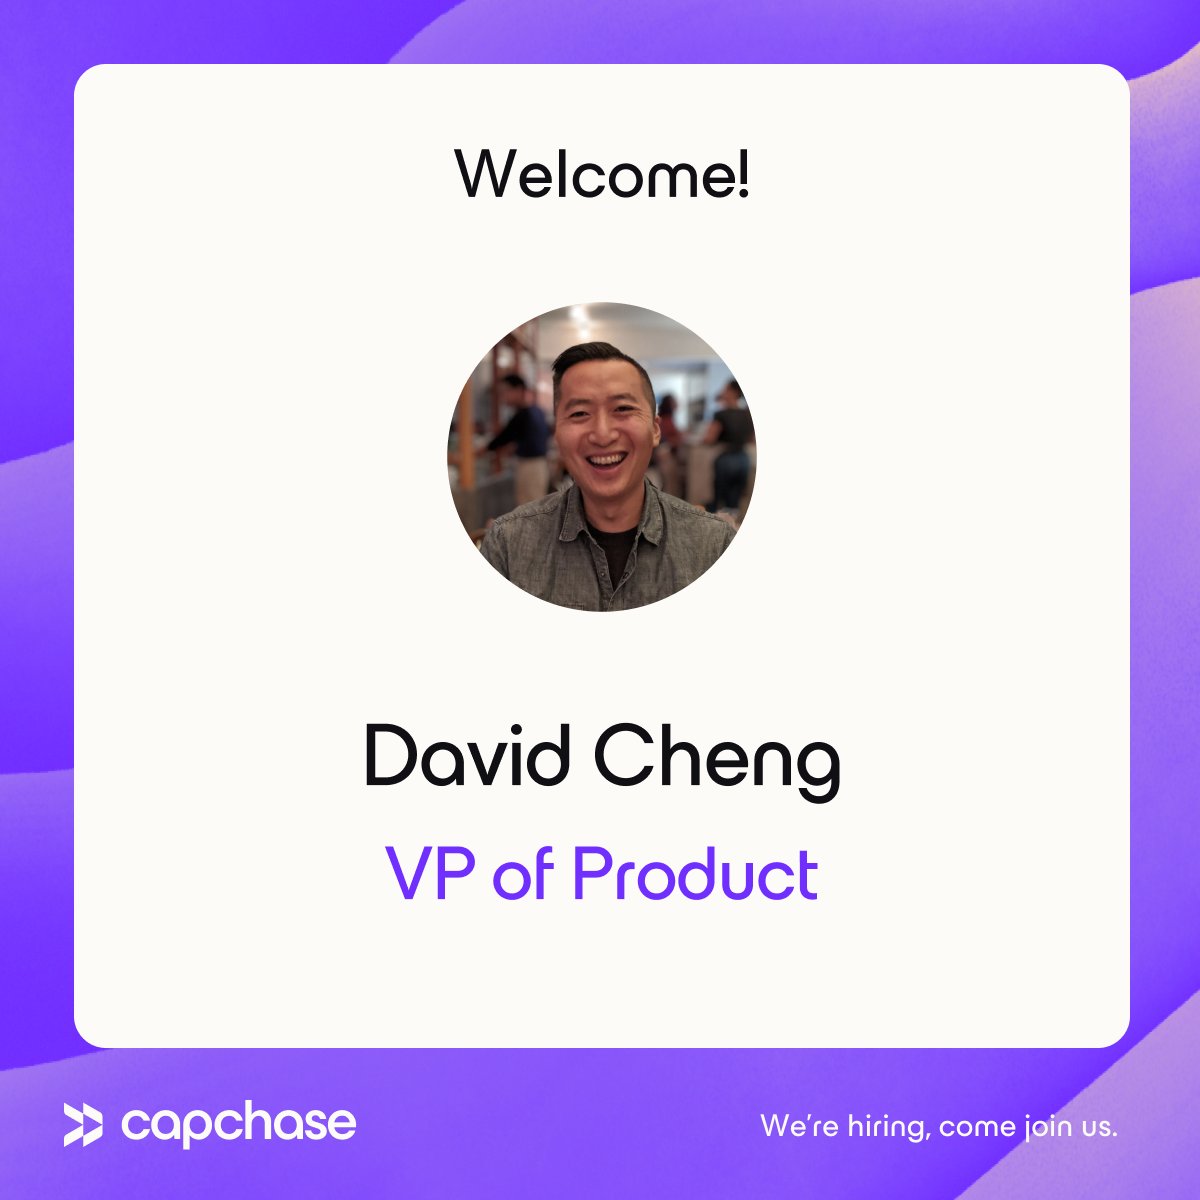 We'd like to give a warm welcome to @DavidPCheng to the Capchase team! 👋 He's joining us remotely from the SF Bay Area and will be leading the Product team. We're excited to have him onboard and take our financing tools to the next level 🚀